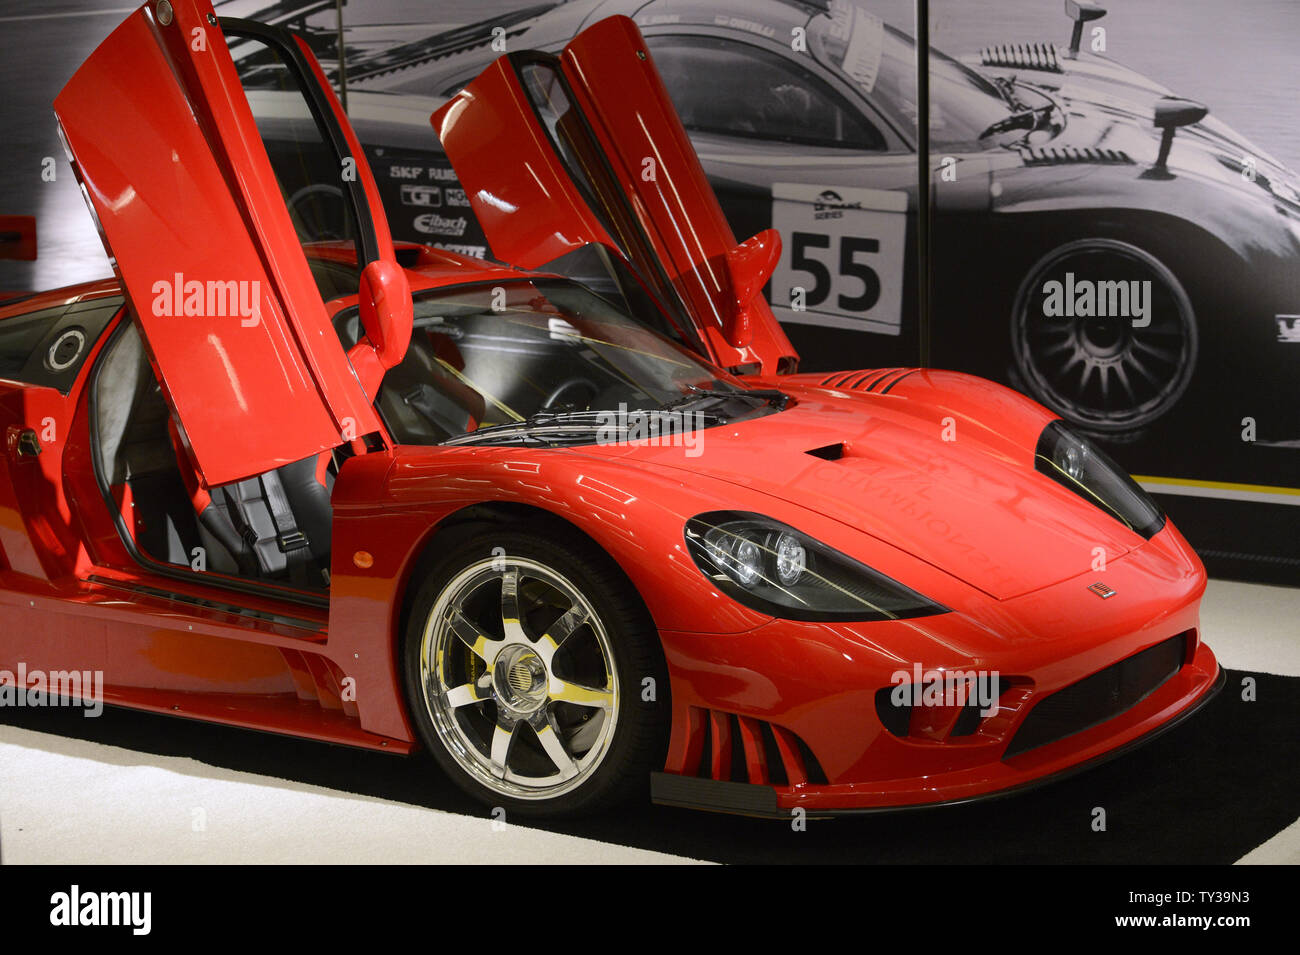 A Saleen S7 is seen at the 2012 Los Angeles Auto Show held at the Convention Center in Los Angeles, California on November 29, 2012.      UPI/Phil McCarten Stock Photo